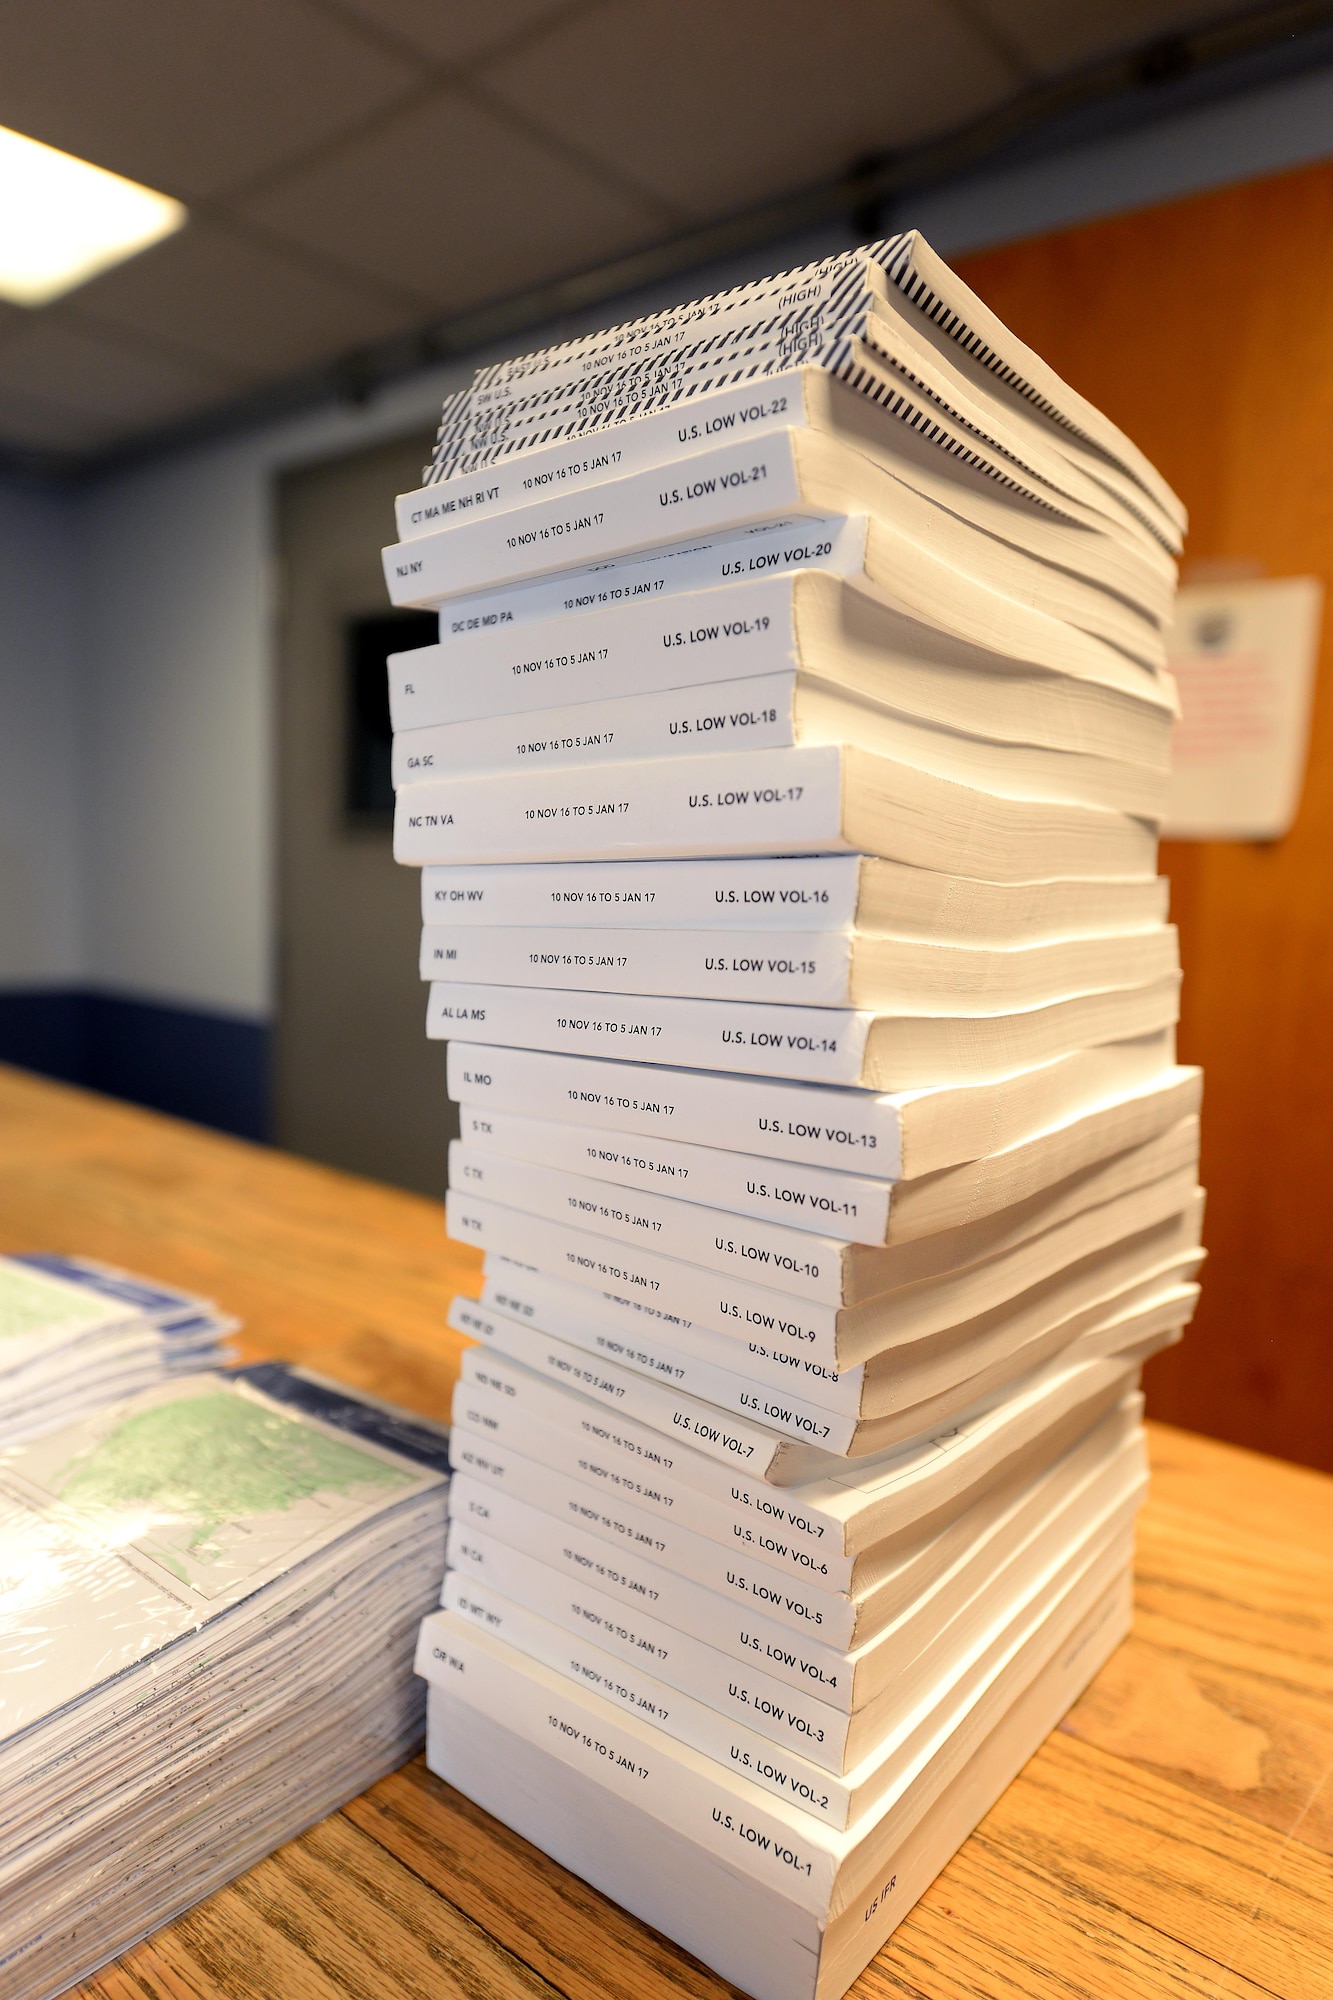 A stack of flight information publications sits on a counter as combat crew communications personnel build FLIP bags for Offutt missions Nov. 30, 2016 at Offutt Air Force Base, Neb. (U.S. Air Force photo by Delanie Stafford)